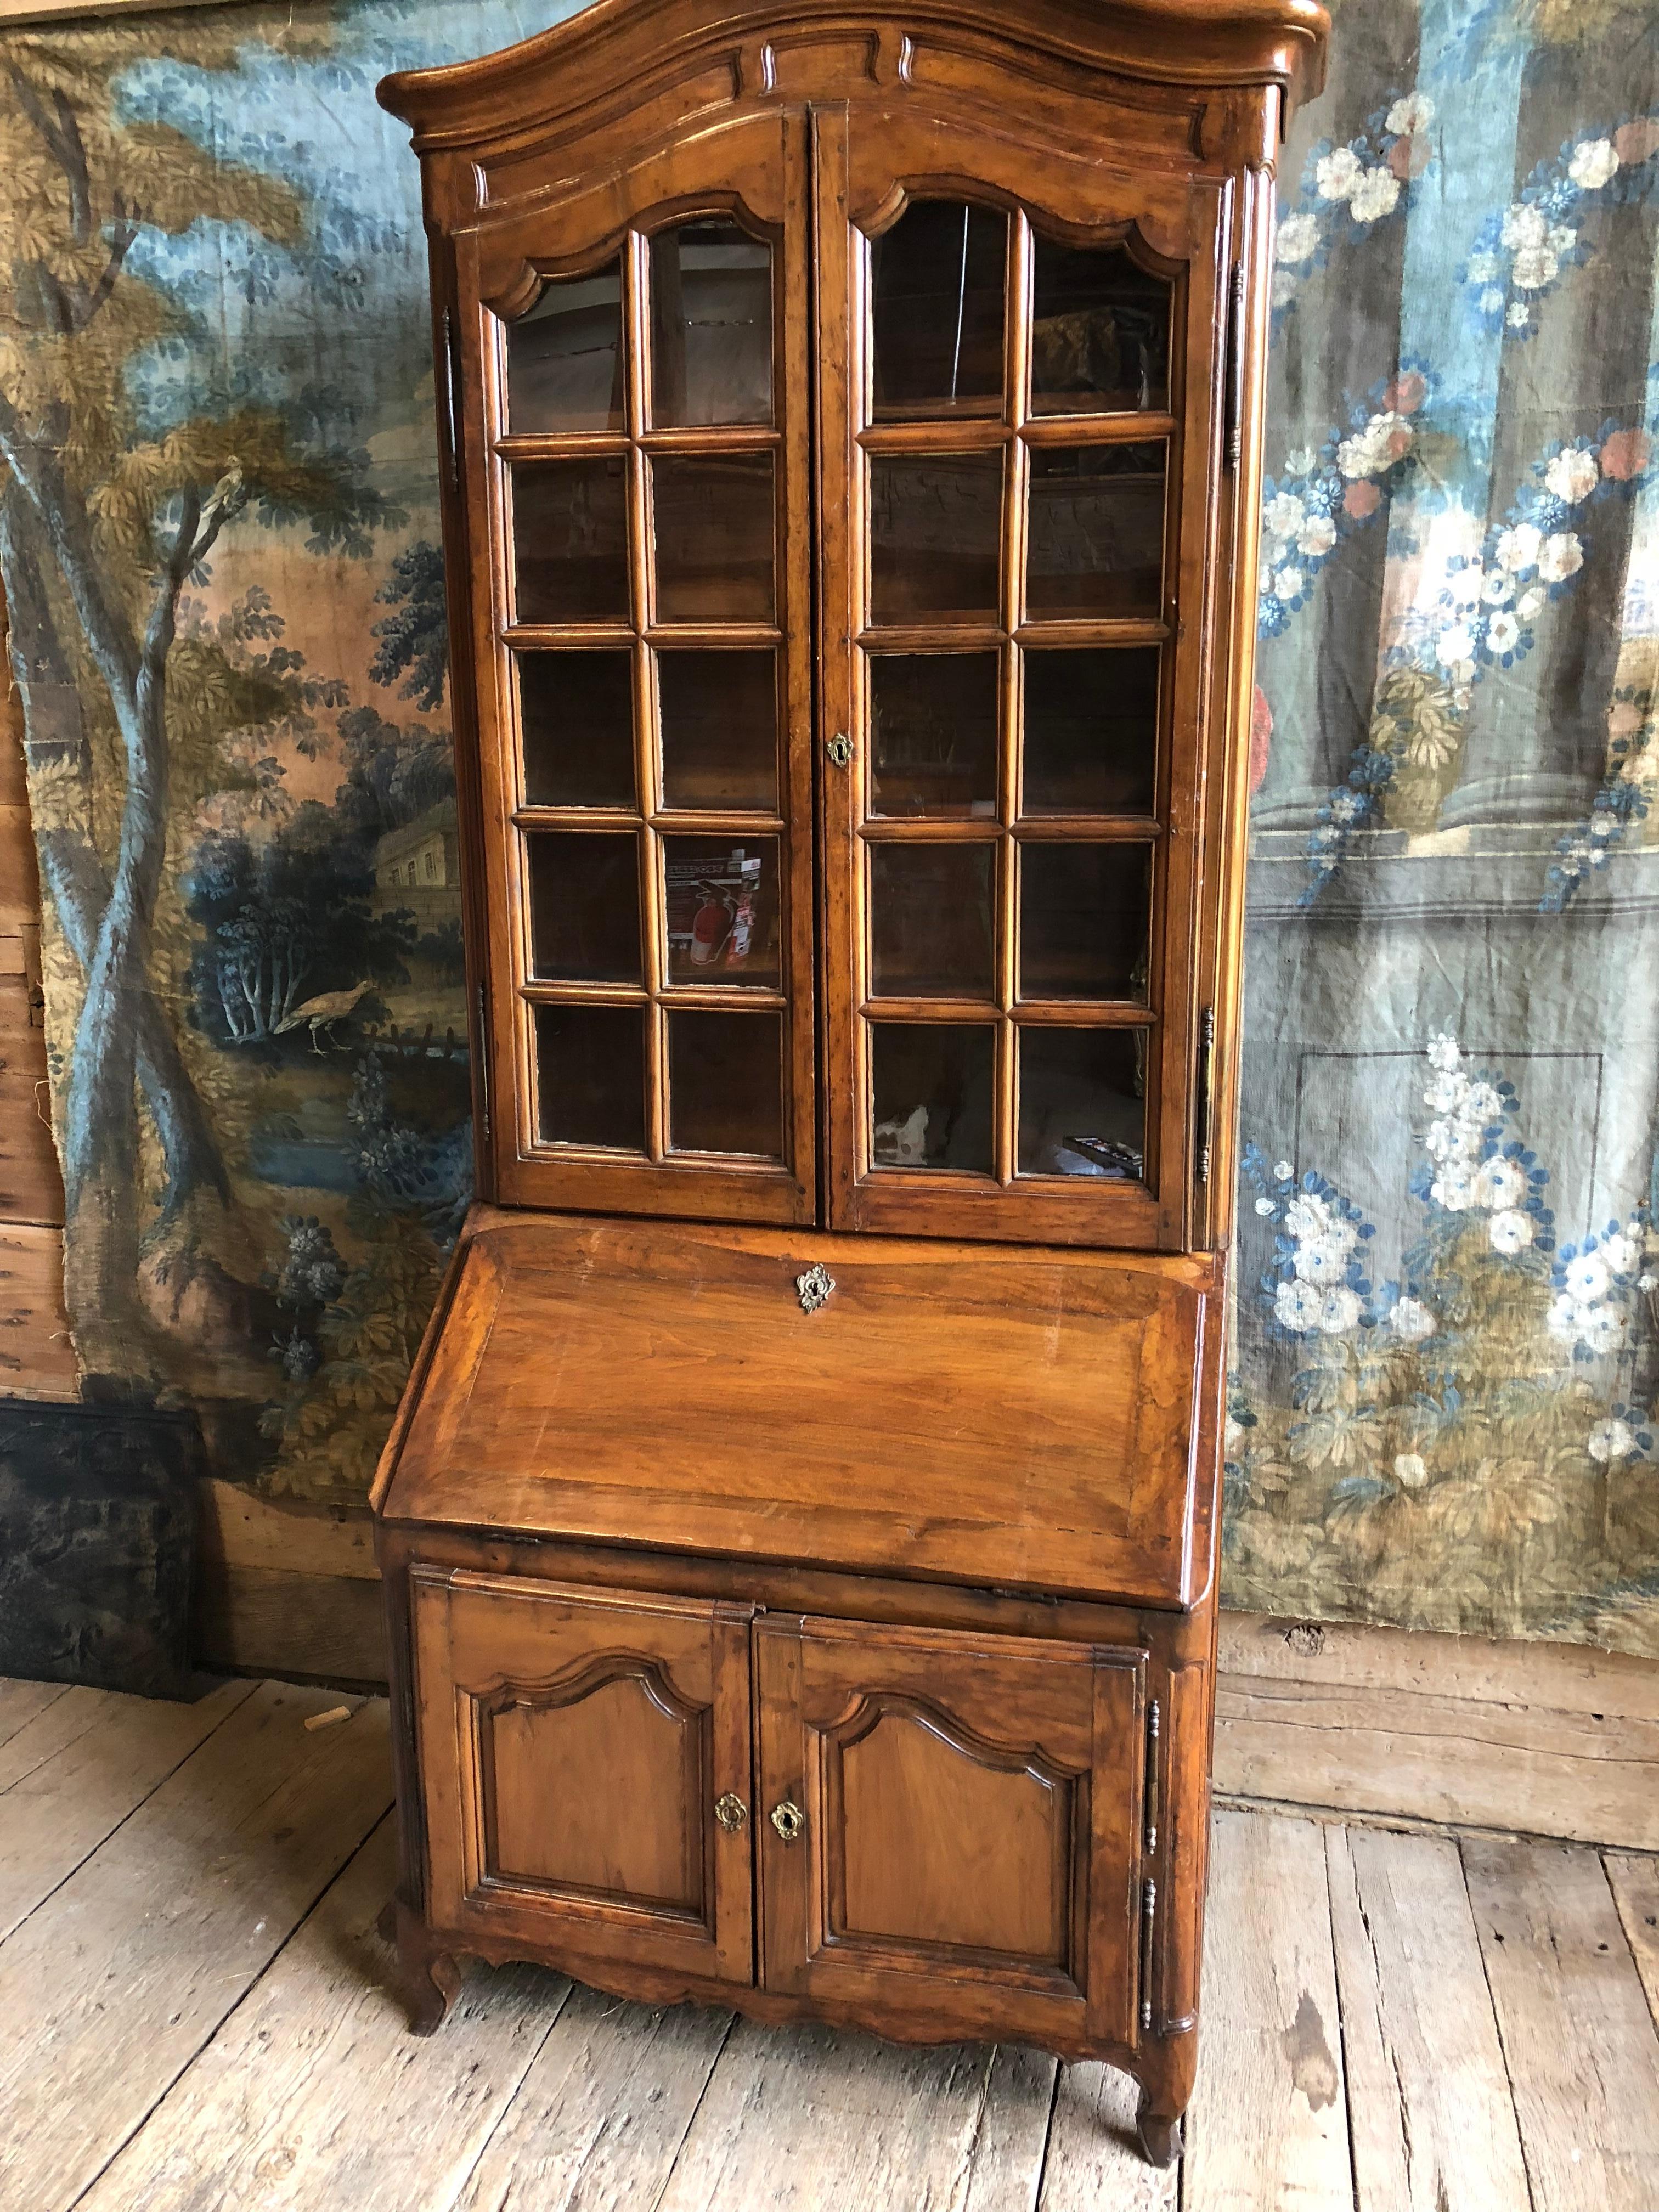 A Louis XV period secretaire with upper bookcase, French, circa 1760, with an arched bonnet top biblioteque with glazed doors, over a slant-front desk with fitted interior, a lower 2-door cabinet on short cabriole feet.